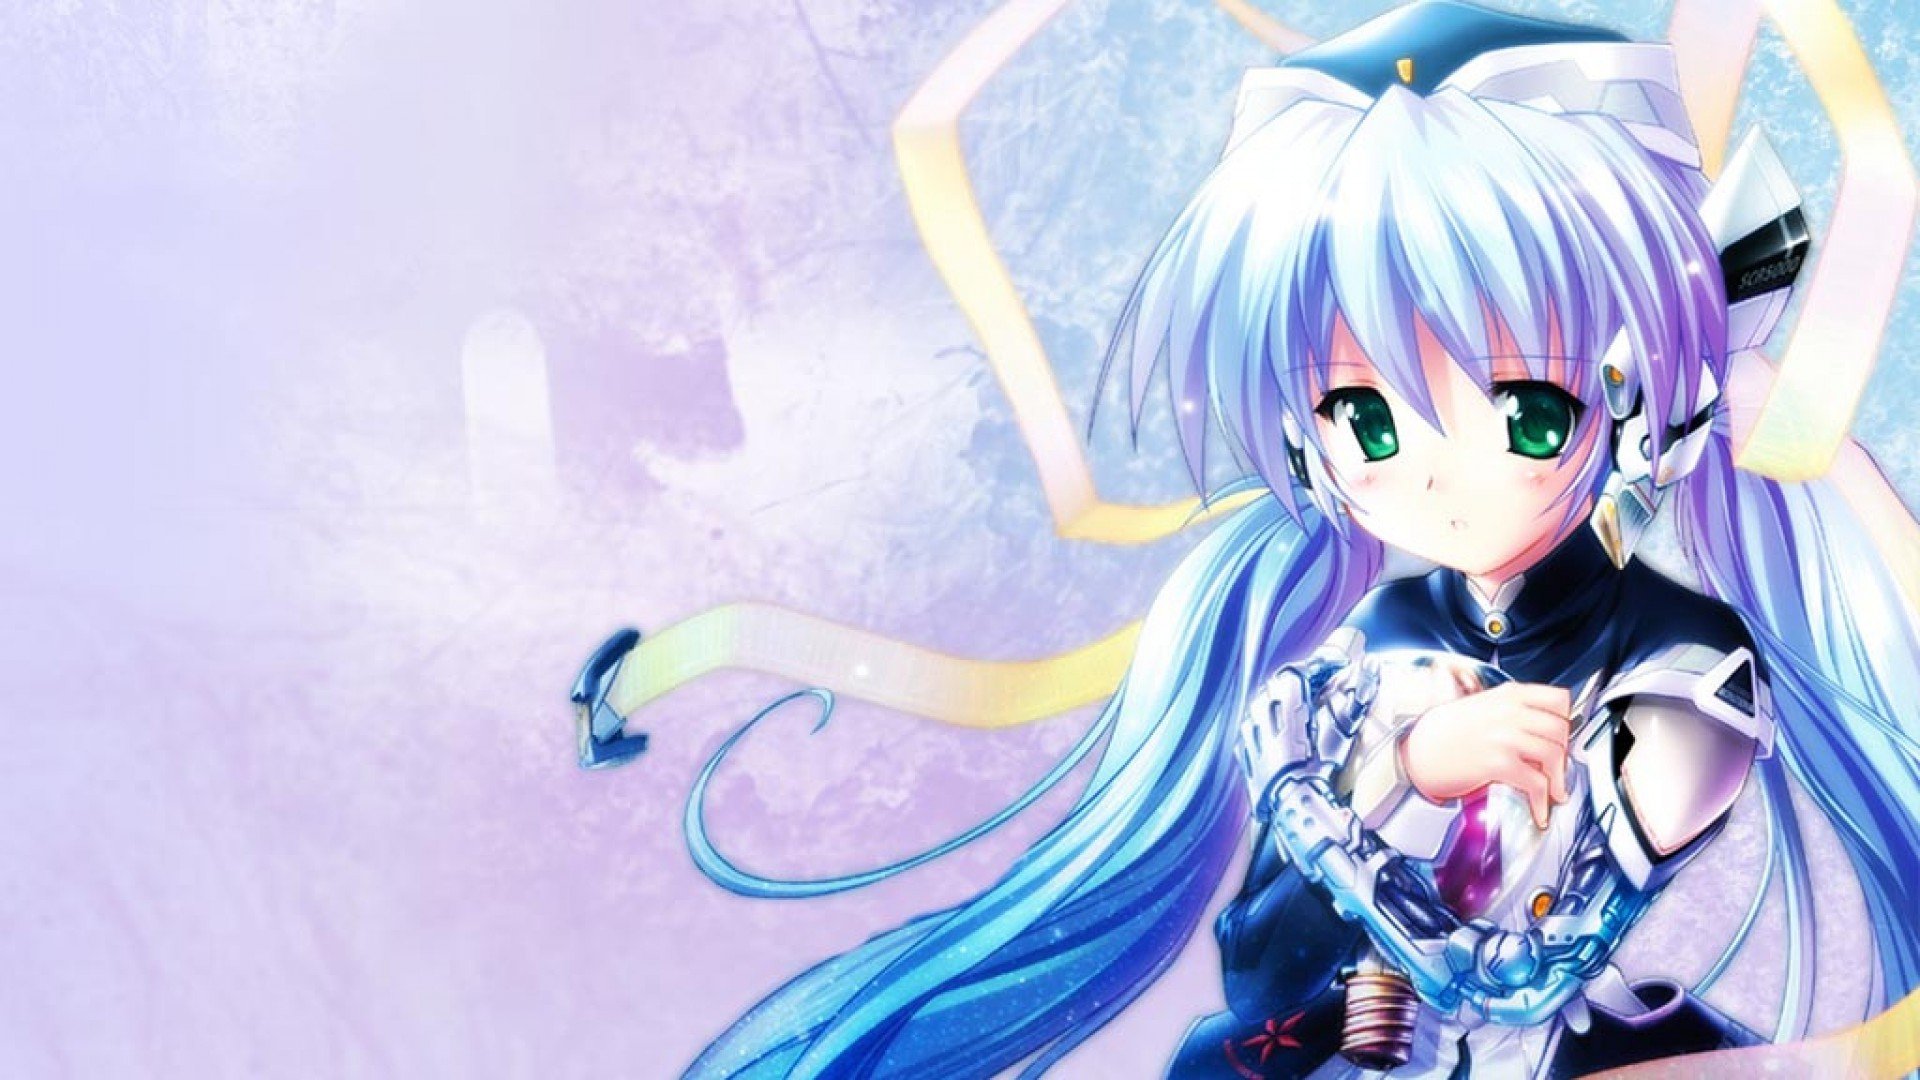 anime pc wallpaper wallpapers55com   Best Wallpapers for PCs